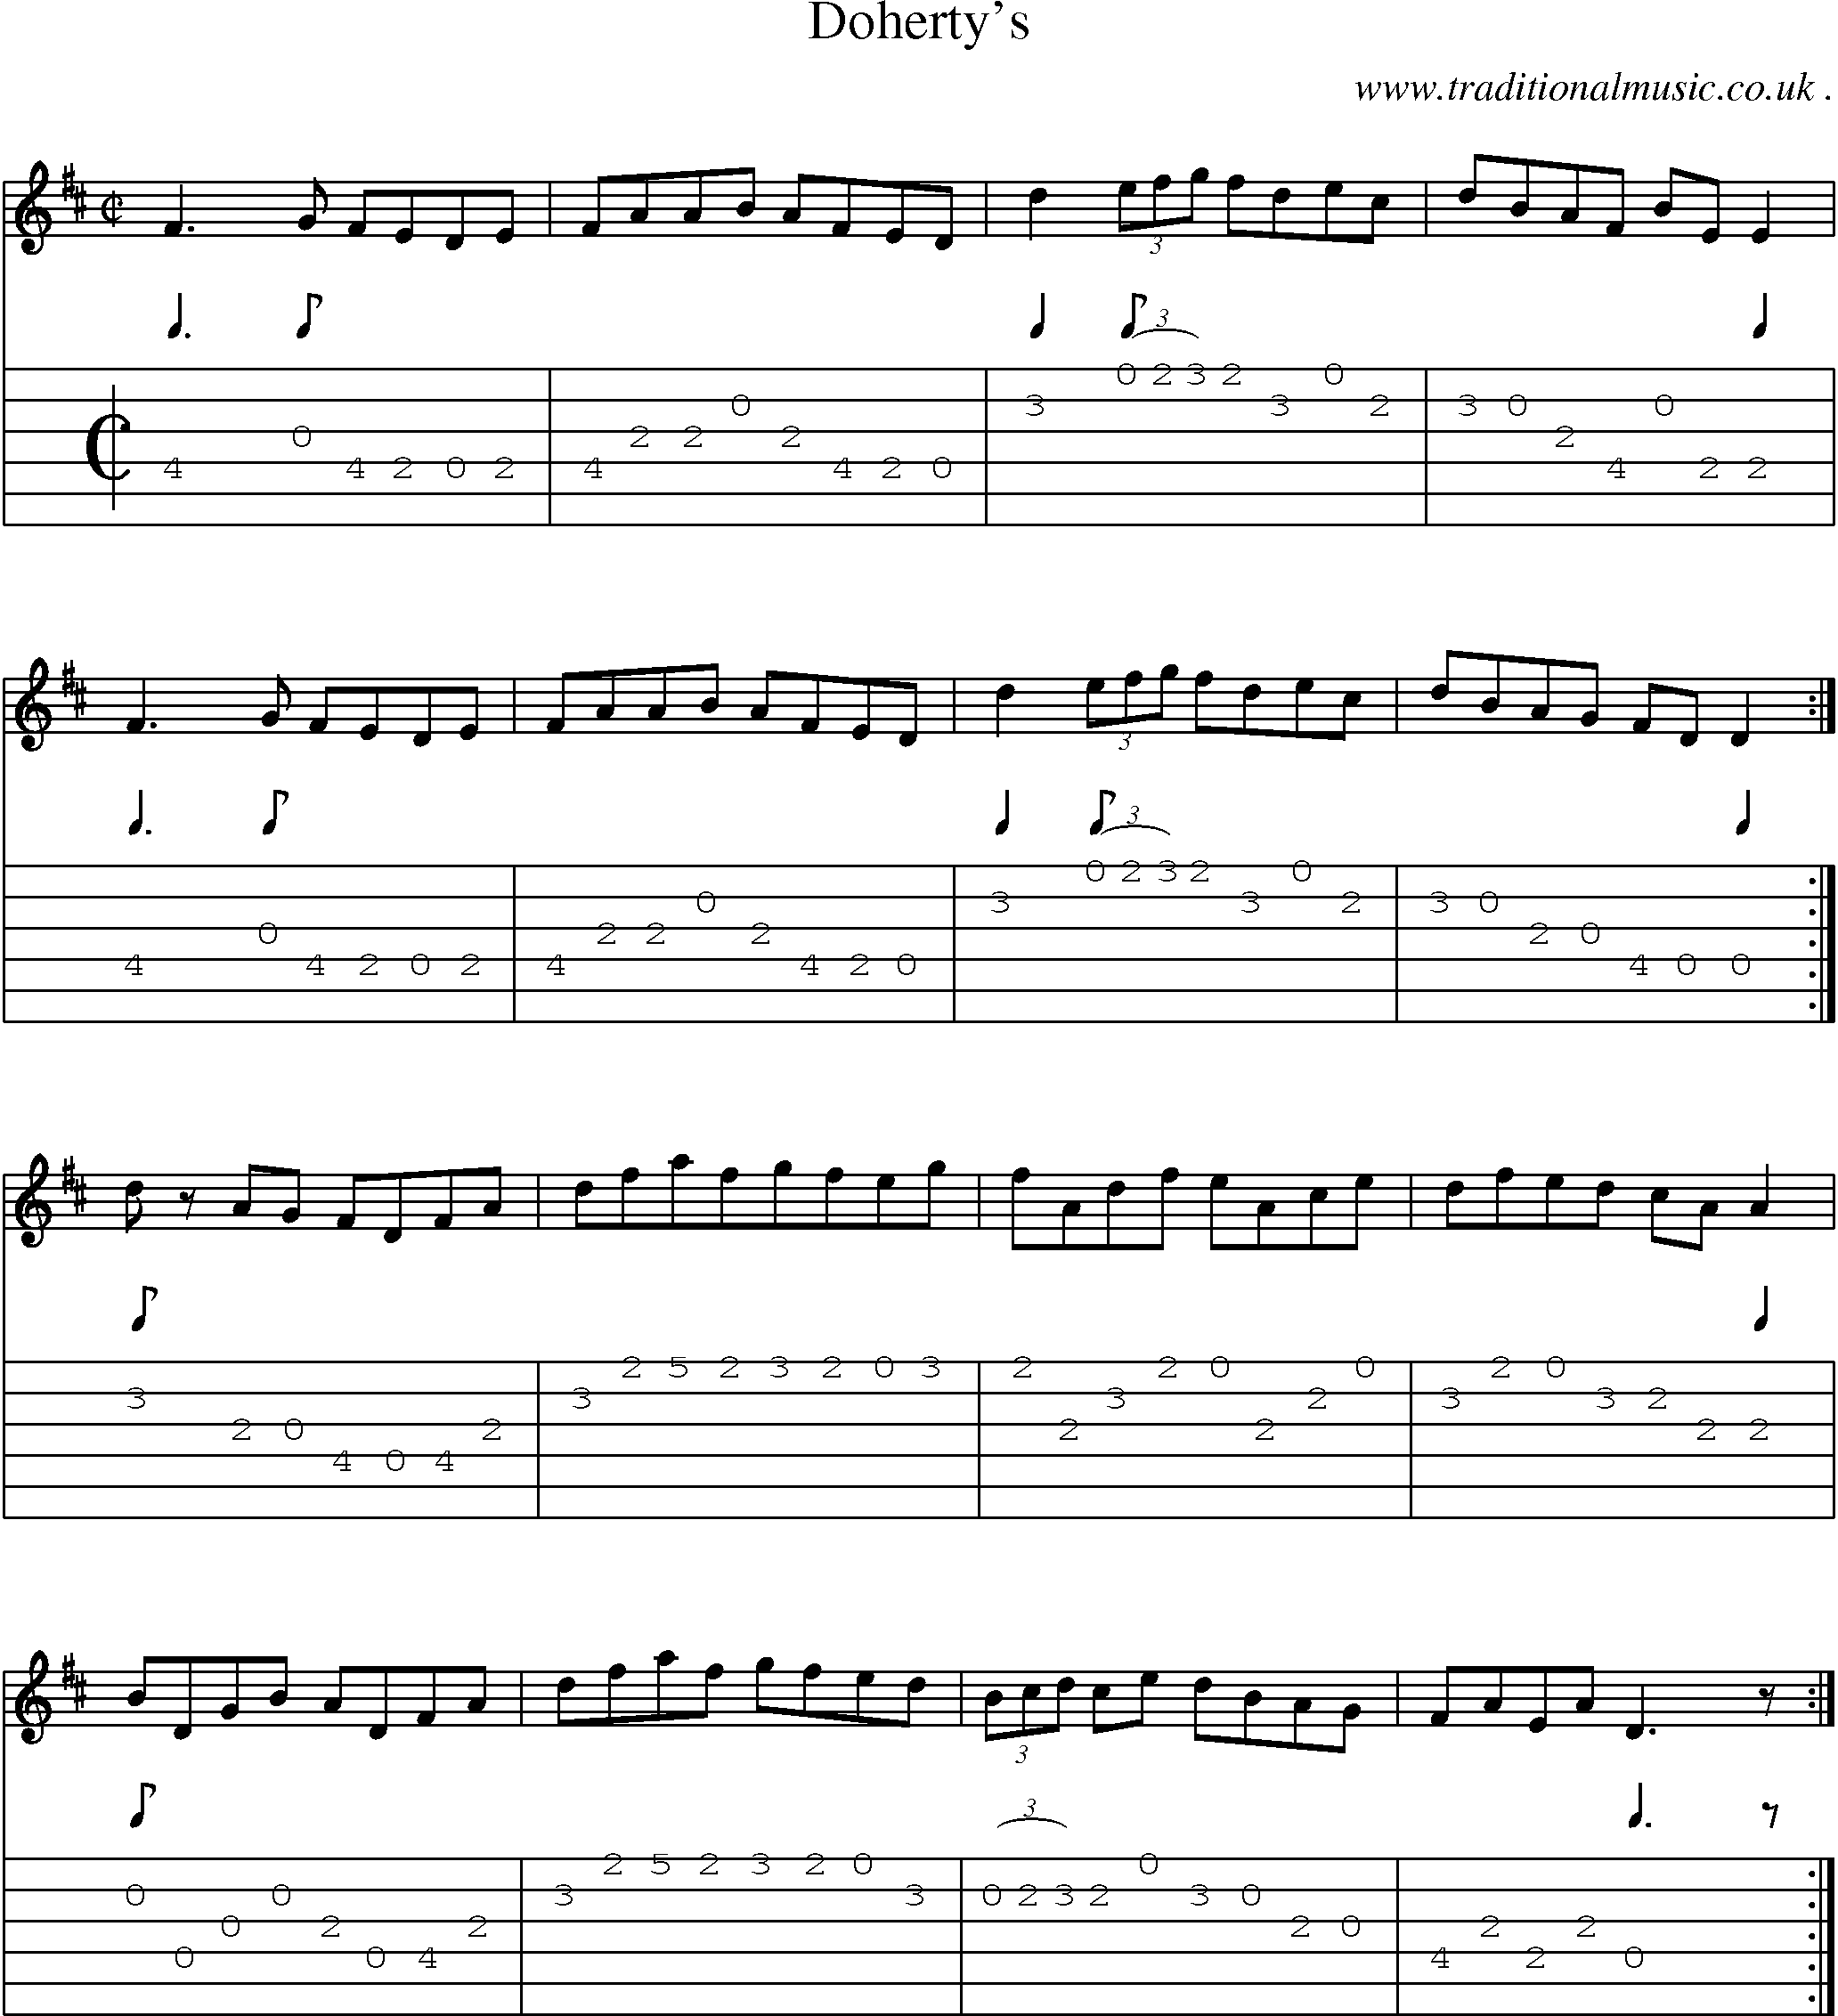 Sheet-Music and Guitar Tabs for Dohertys